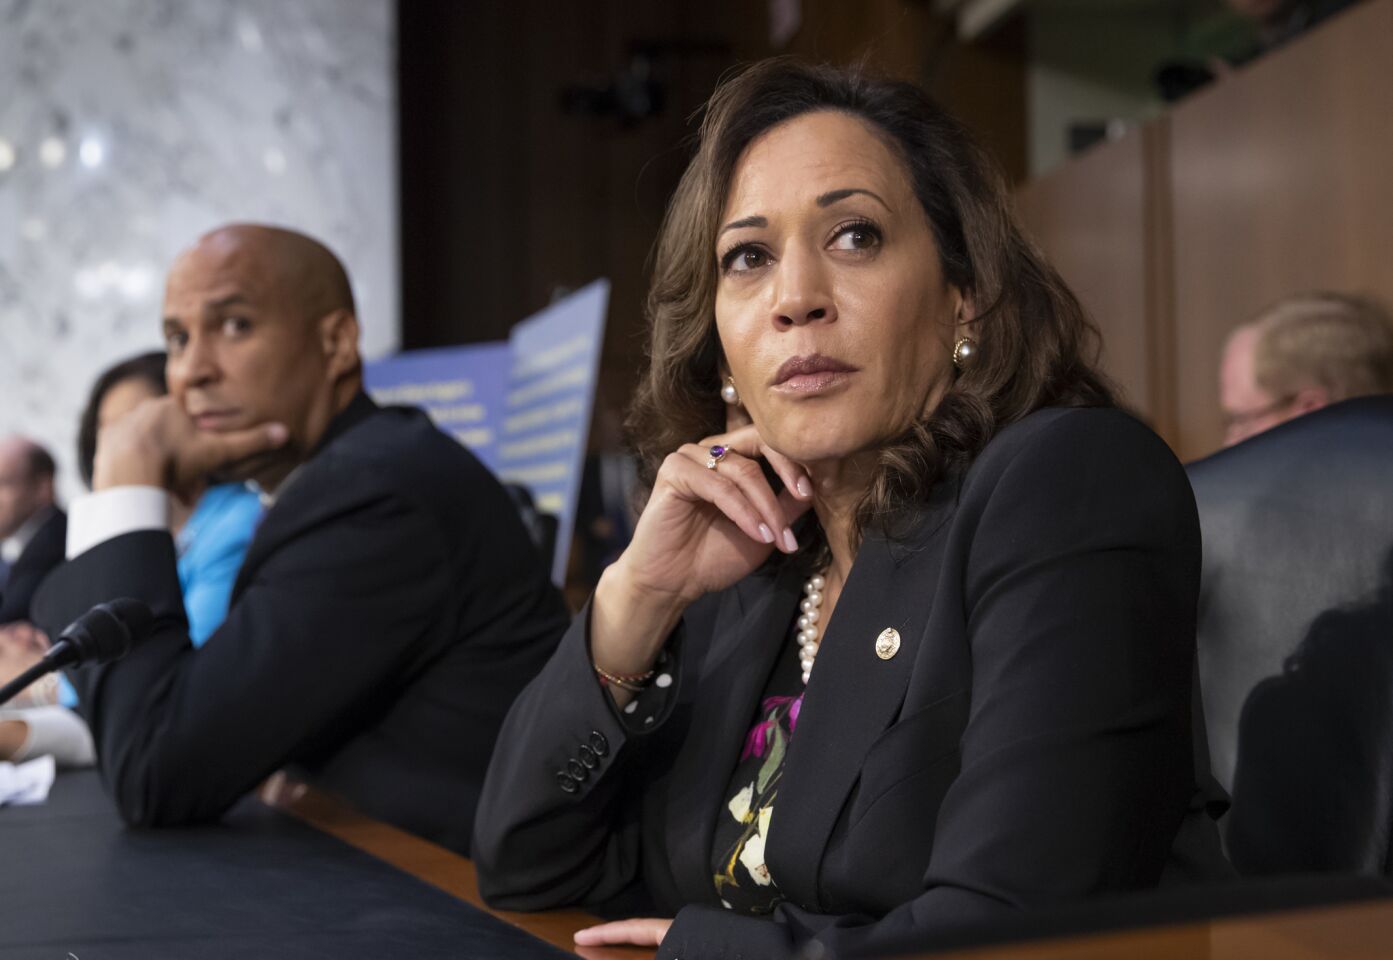 Sens. Kamala Harris (D-Calif.) and Cory Booker (D-N.J.) pause as protesters disrupt the confirmation hearing of President Trump's Supreme Court nominee, Brett Kavanaugh.